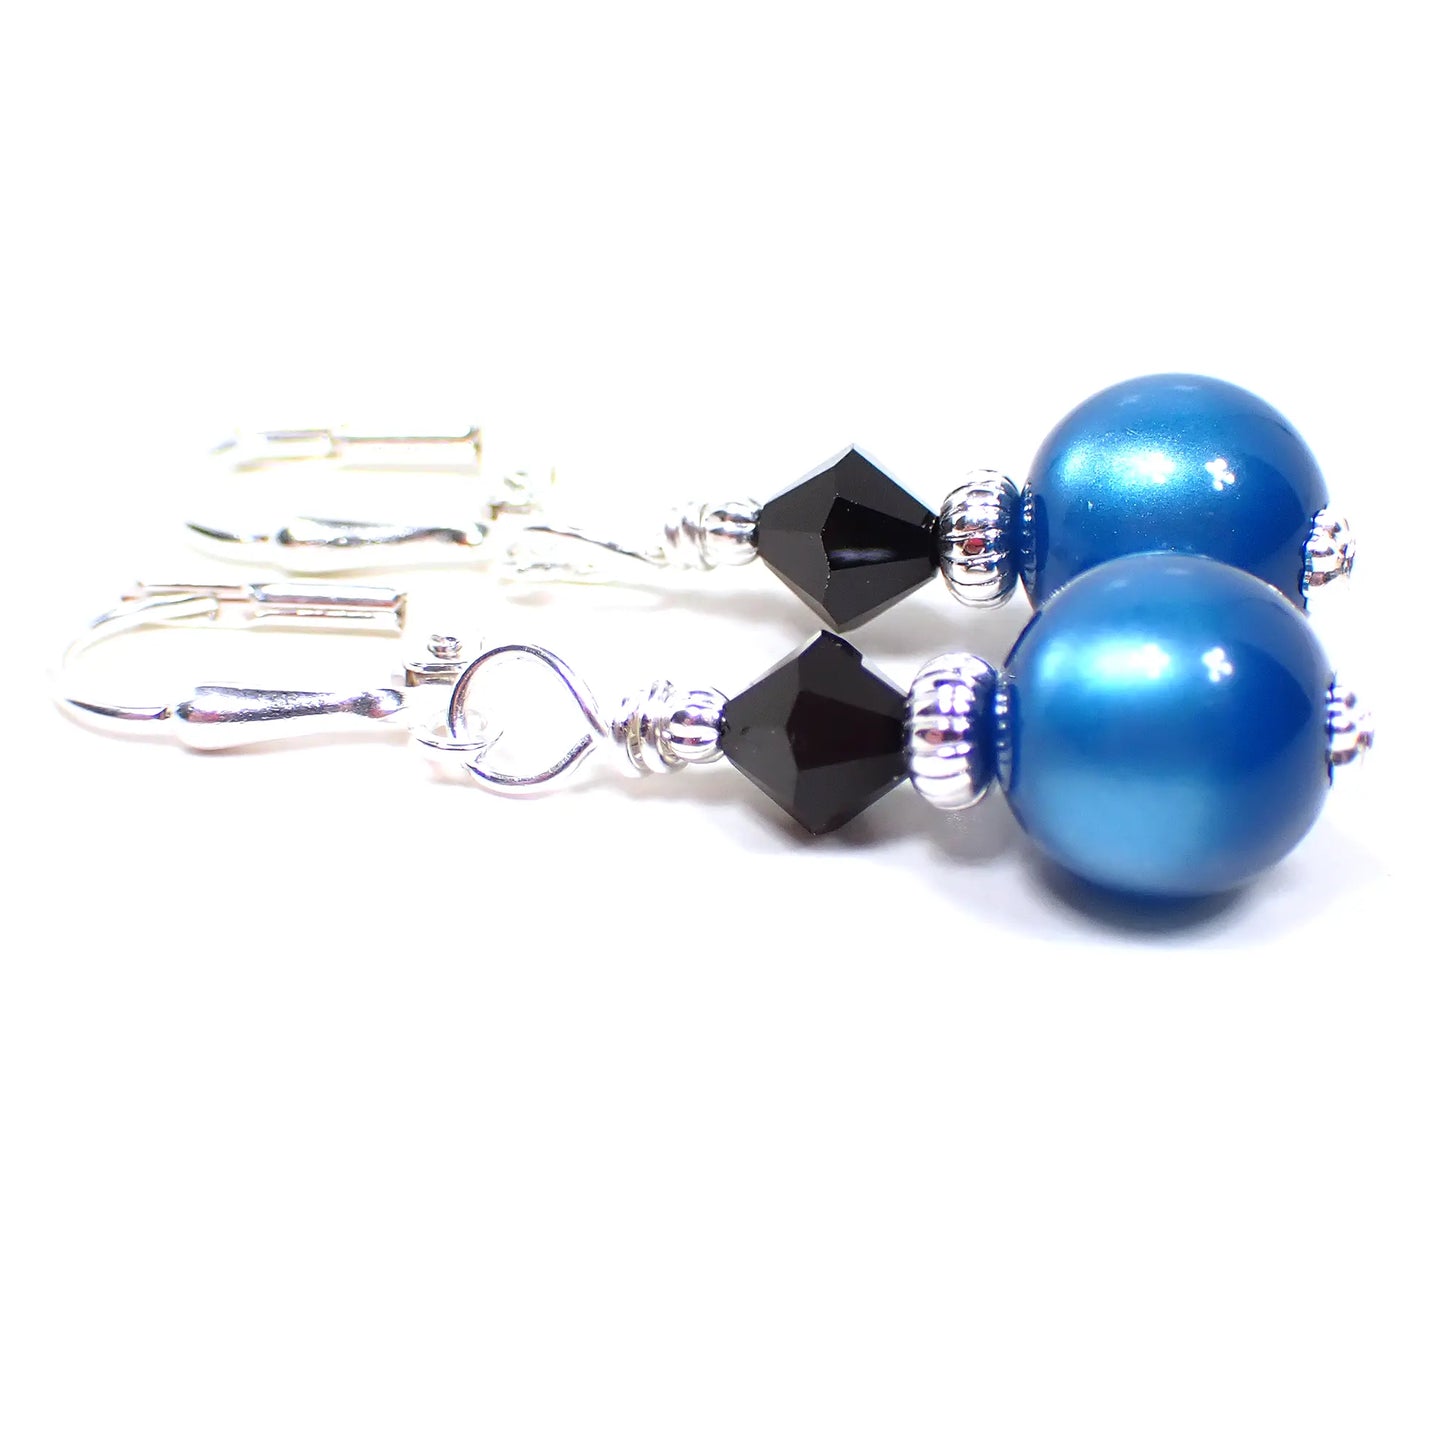 Teal Blue Moonglow Lucite and Black Glass Beaded Handmade Drop Earrings Silver Plated Hook Lever Back or Clip On